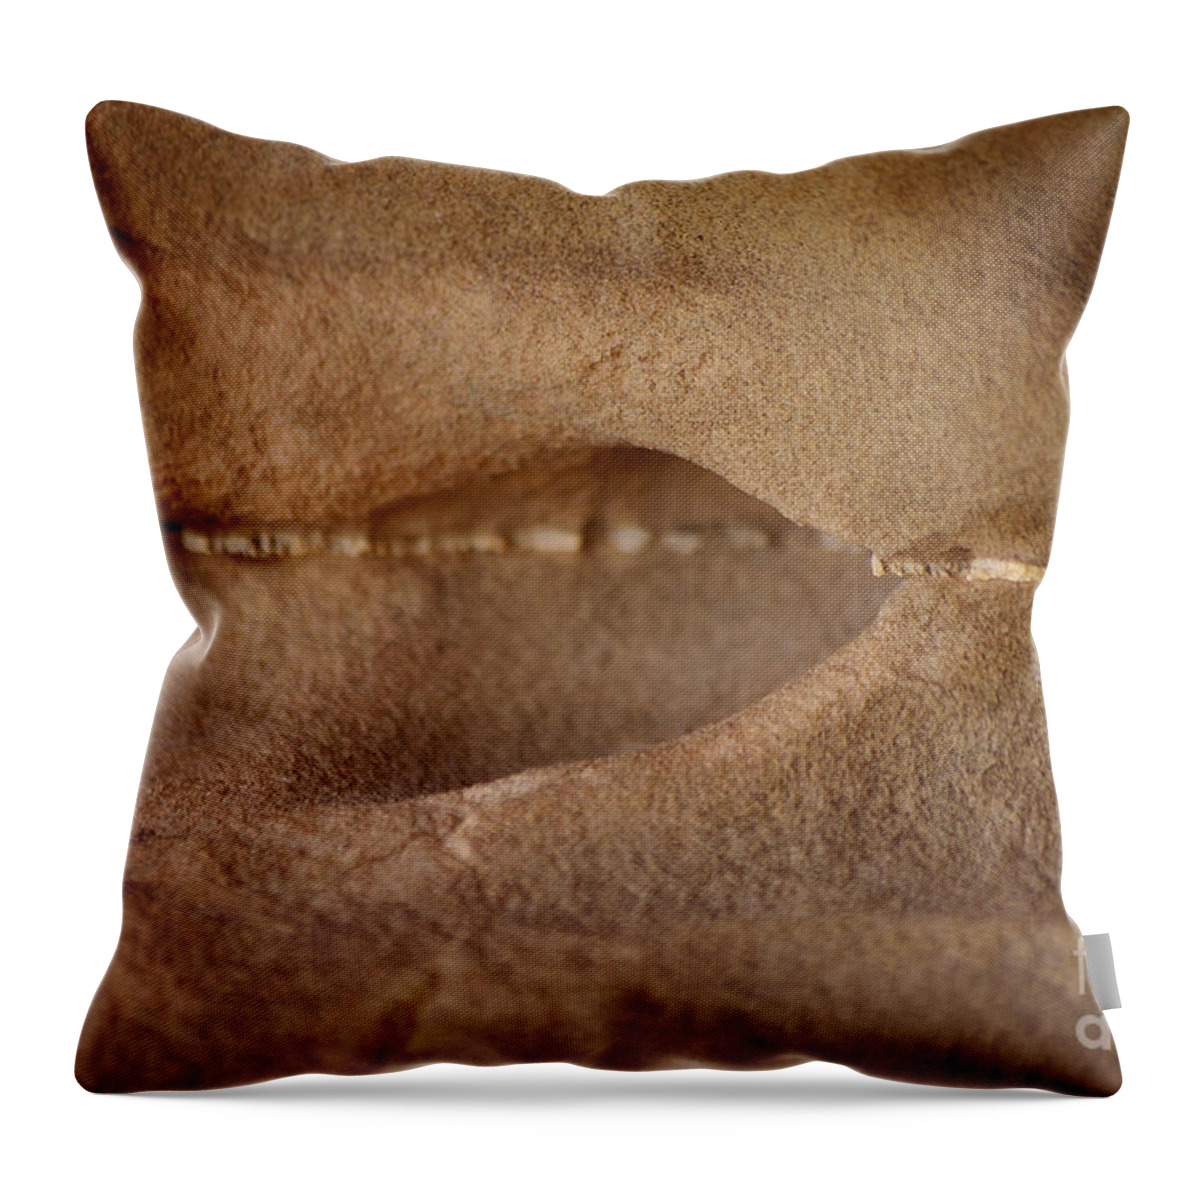 Photograph Throw Pillow featuring the photograph Just a Thin Slice of Time by Vicki Pelham